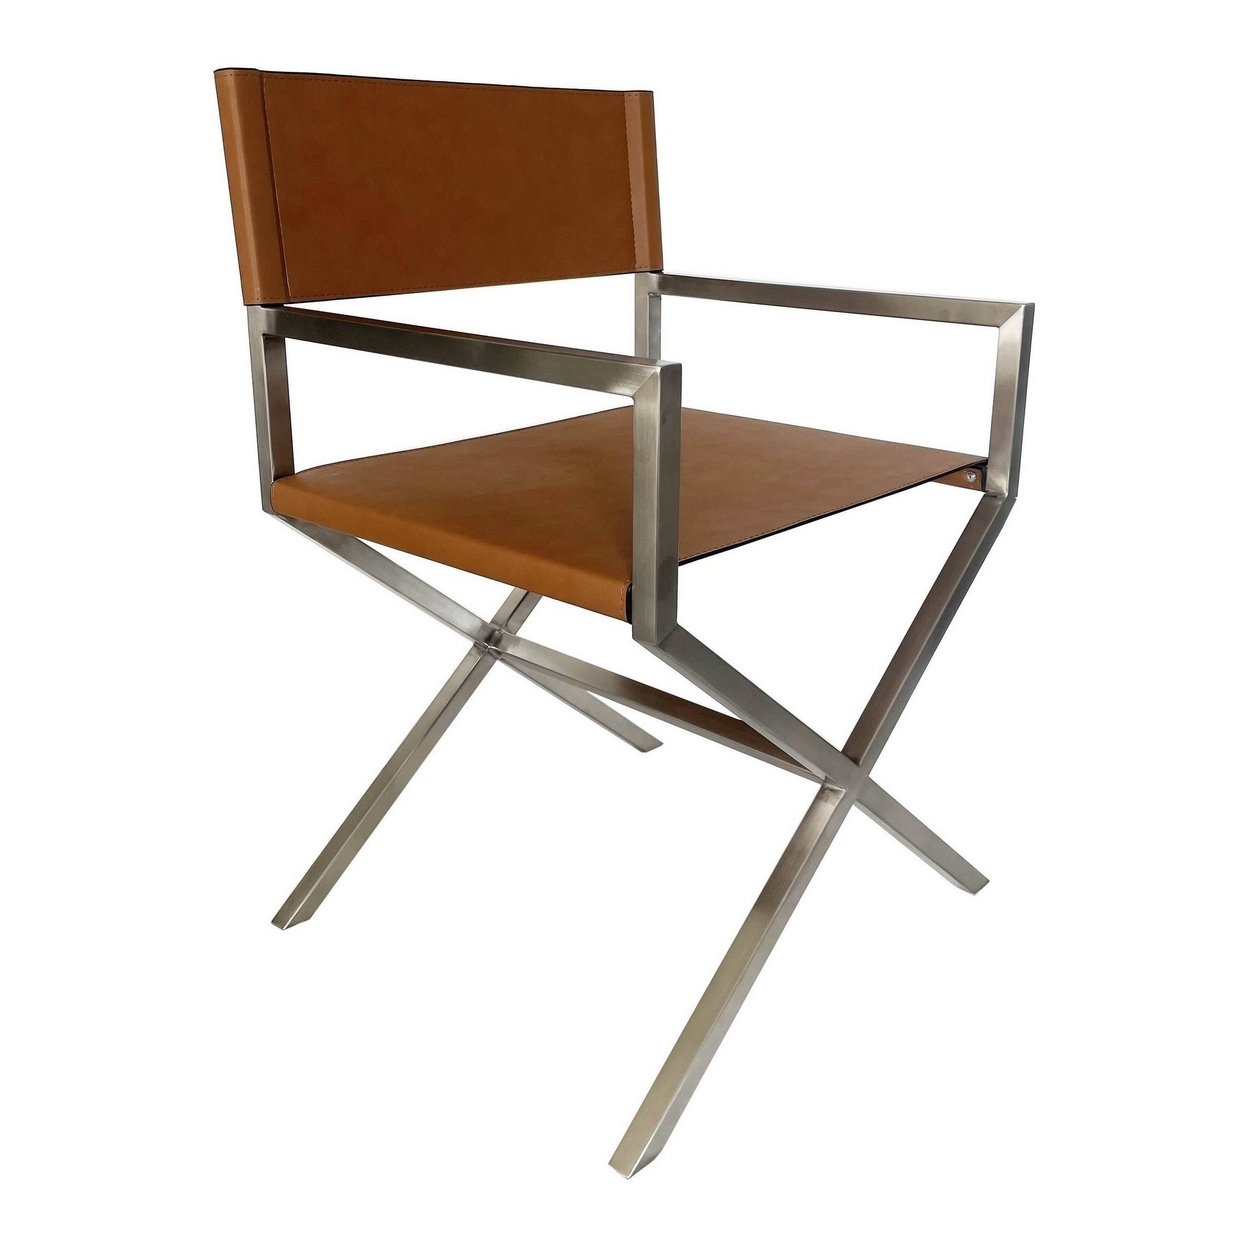 Rux Dining Chair, Smooth Brown Faux Leather, Director's Style Cross Legs -Saltoro Sherpi